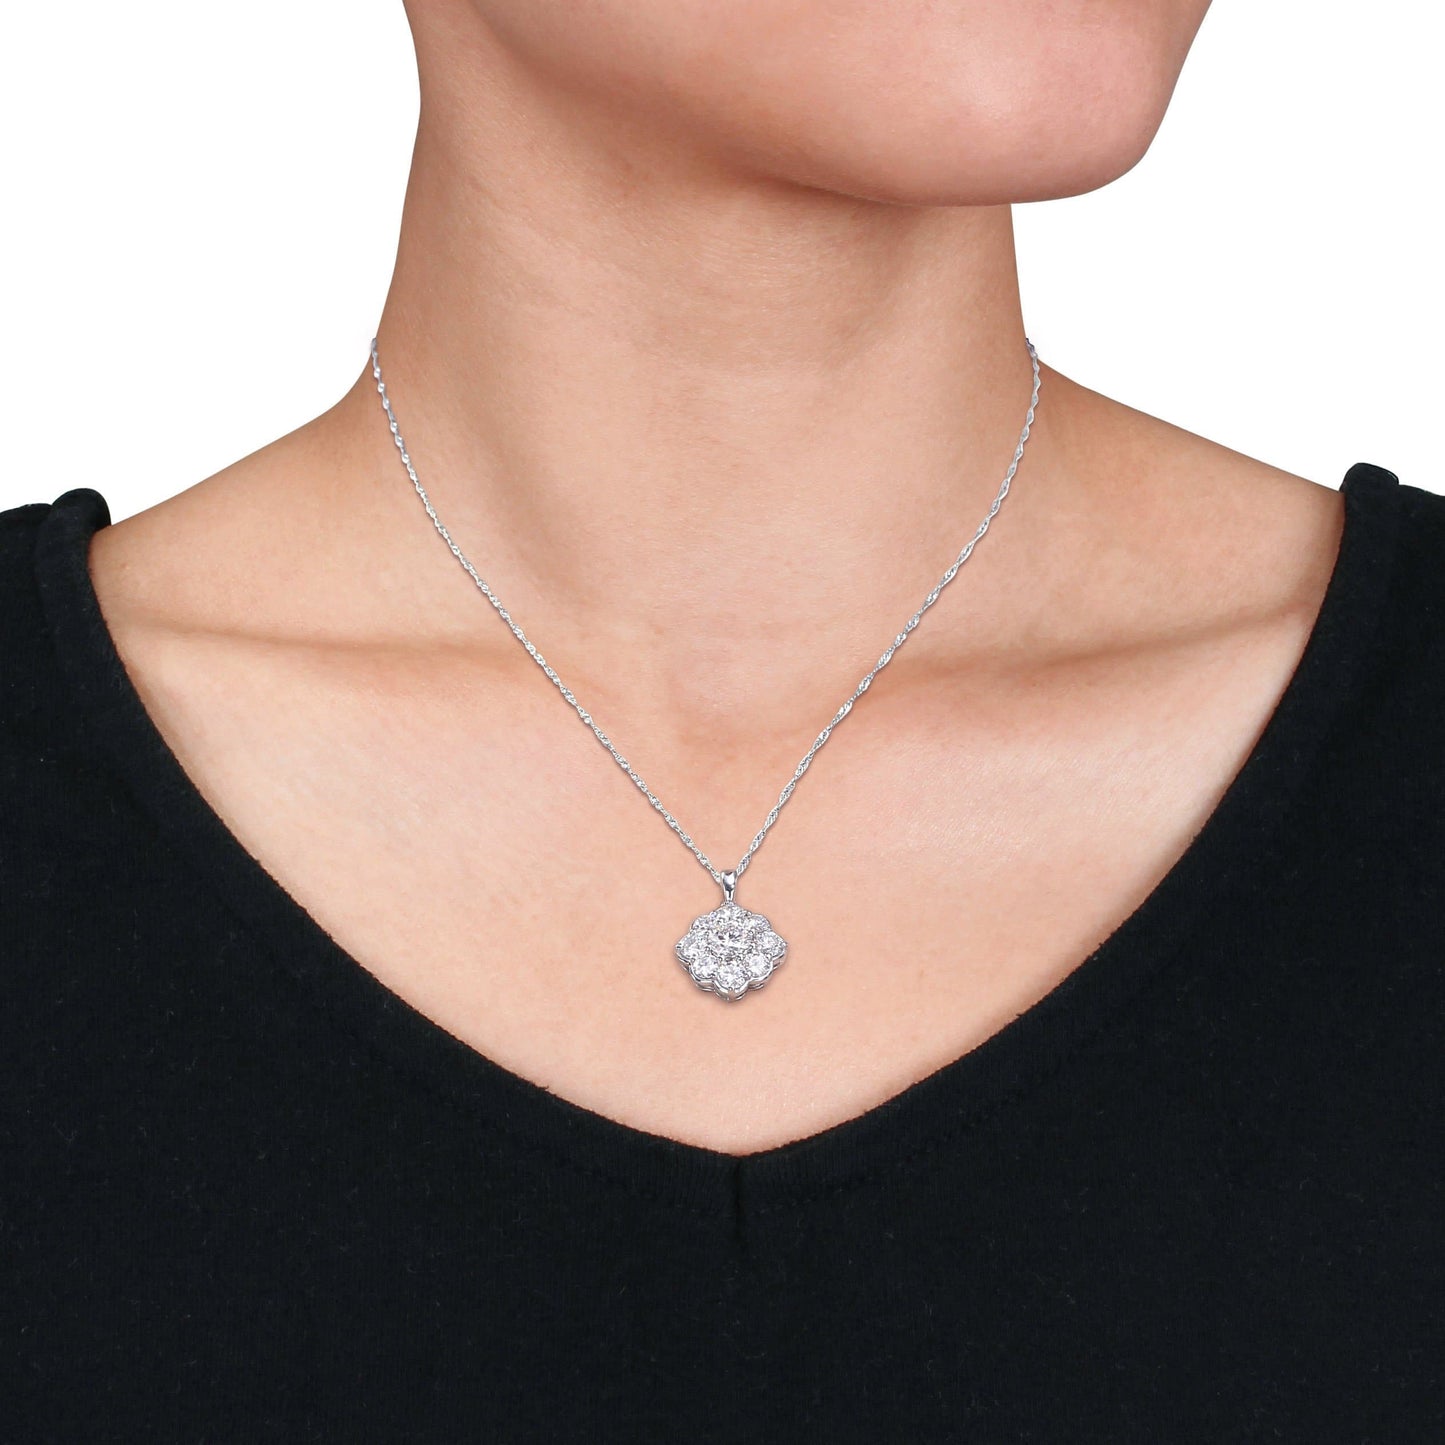 2 1/5ct Moissanite Necklace in White Gold